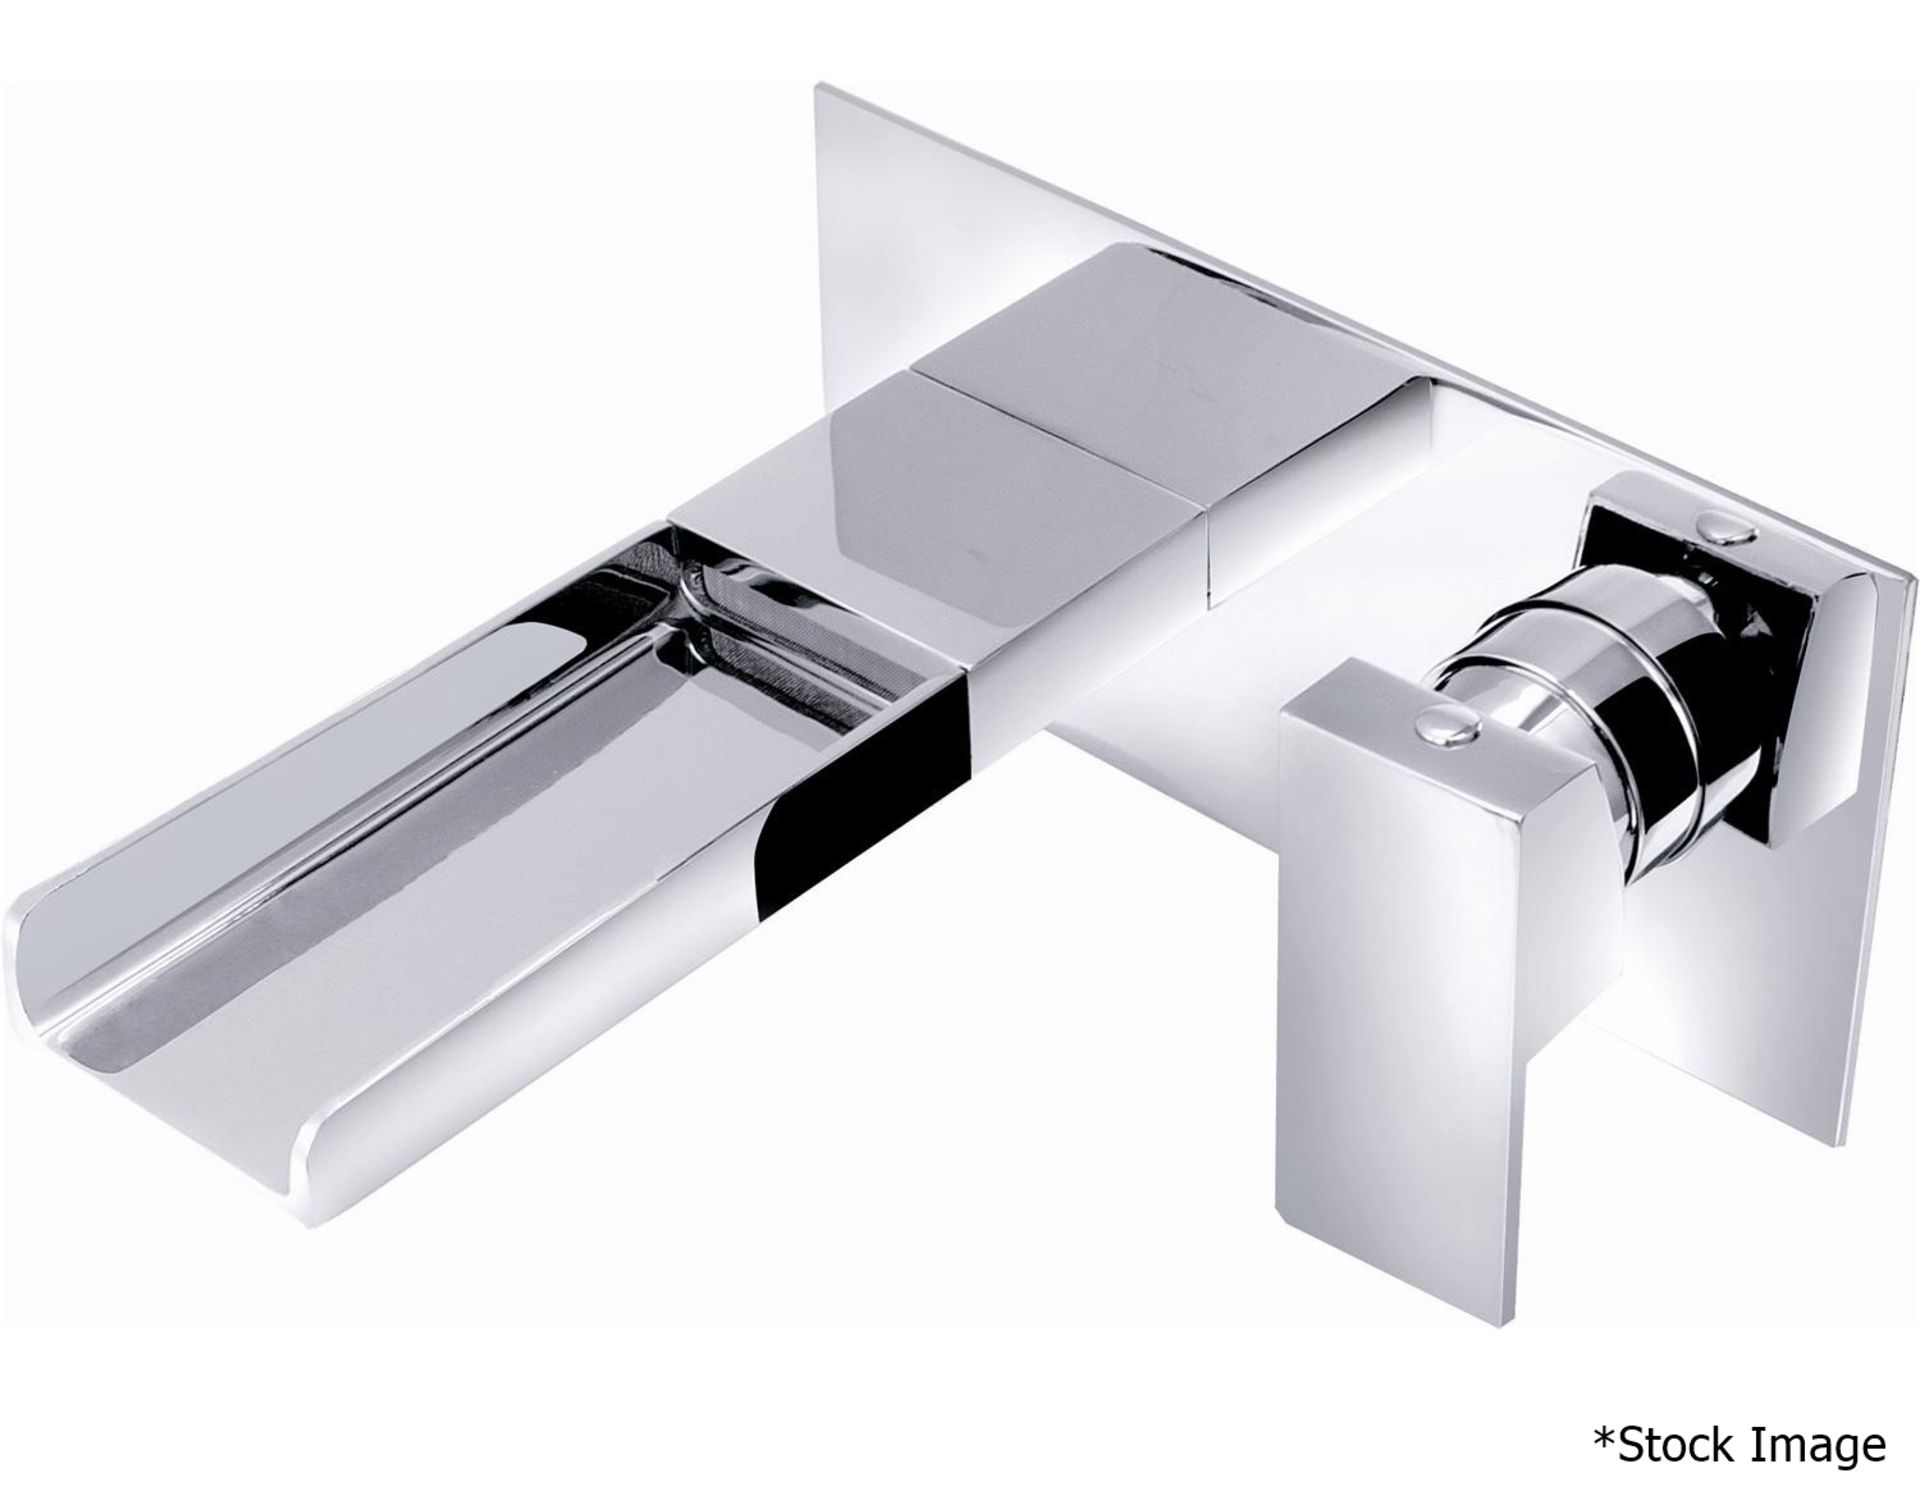 1 x Cassellie 'Dunk' Wall Mounted Waterfall Bath Tap - Ref: DUK016 - New & Boxed Stock - RRP 130.00